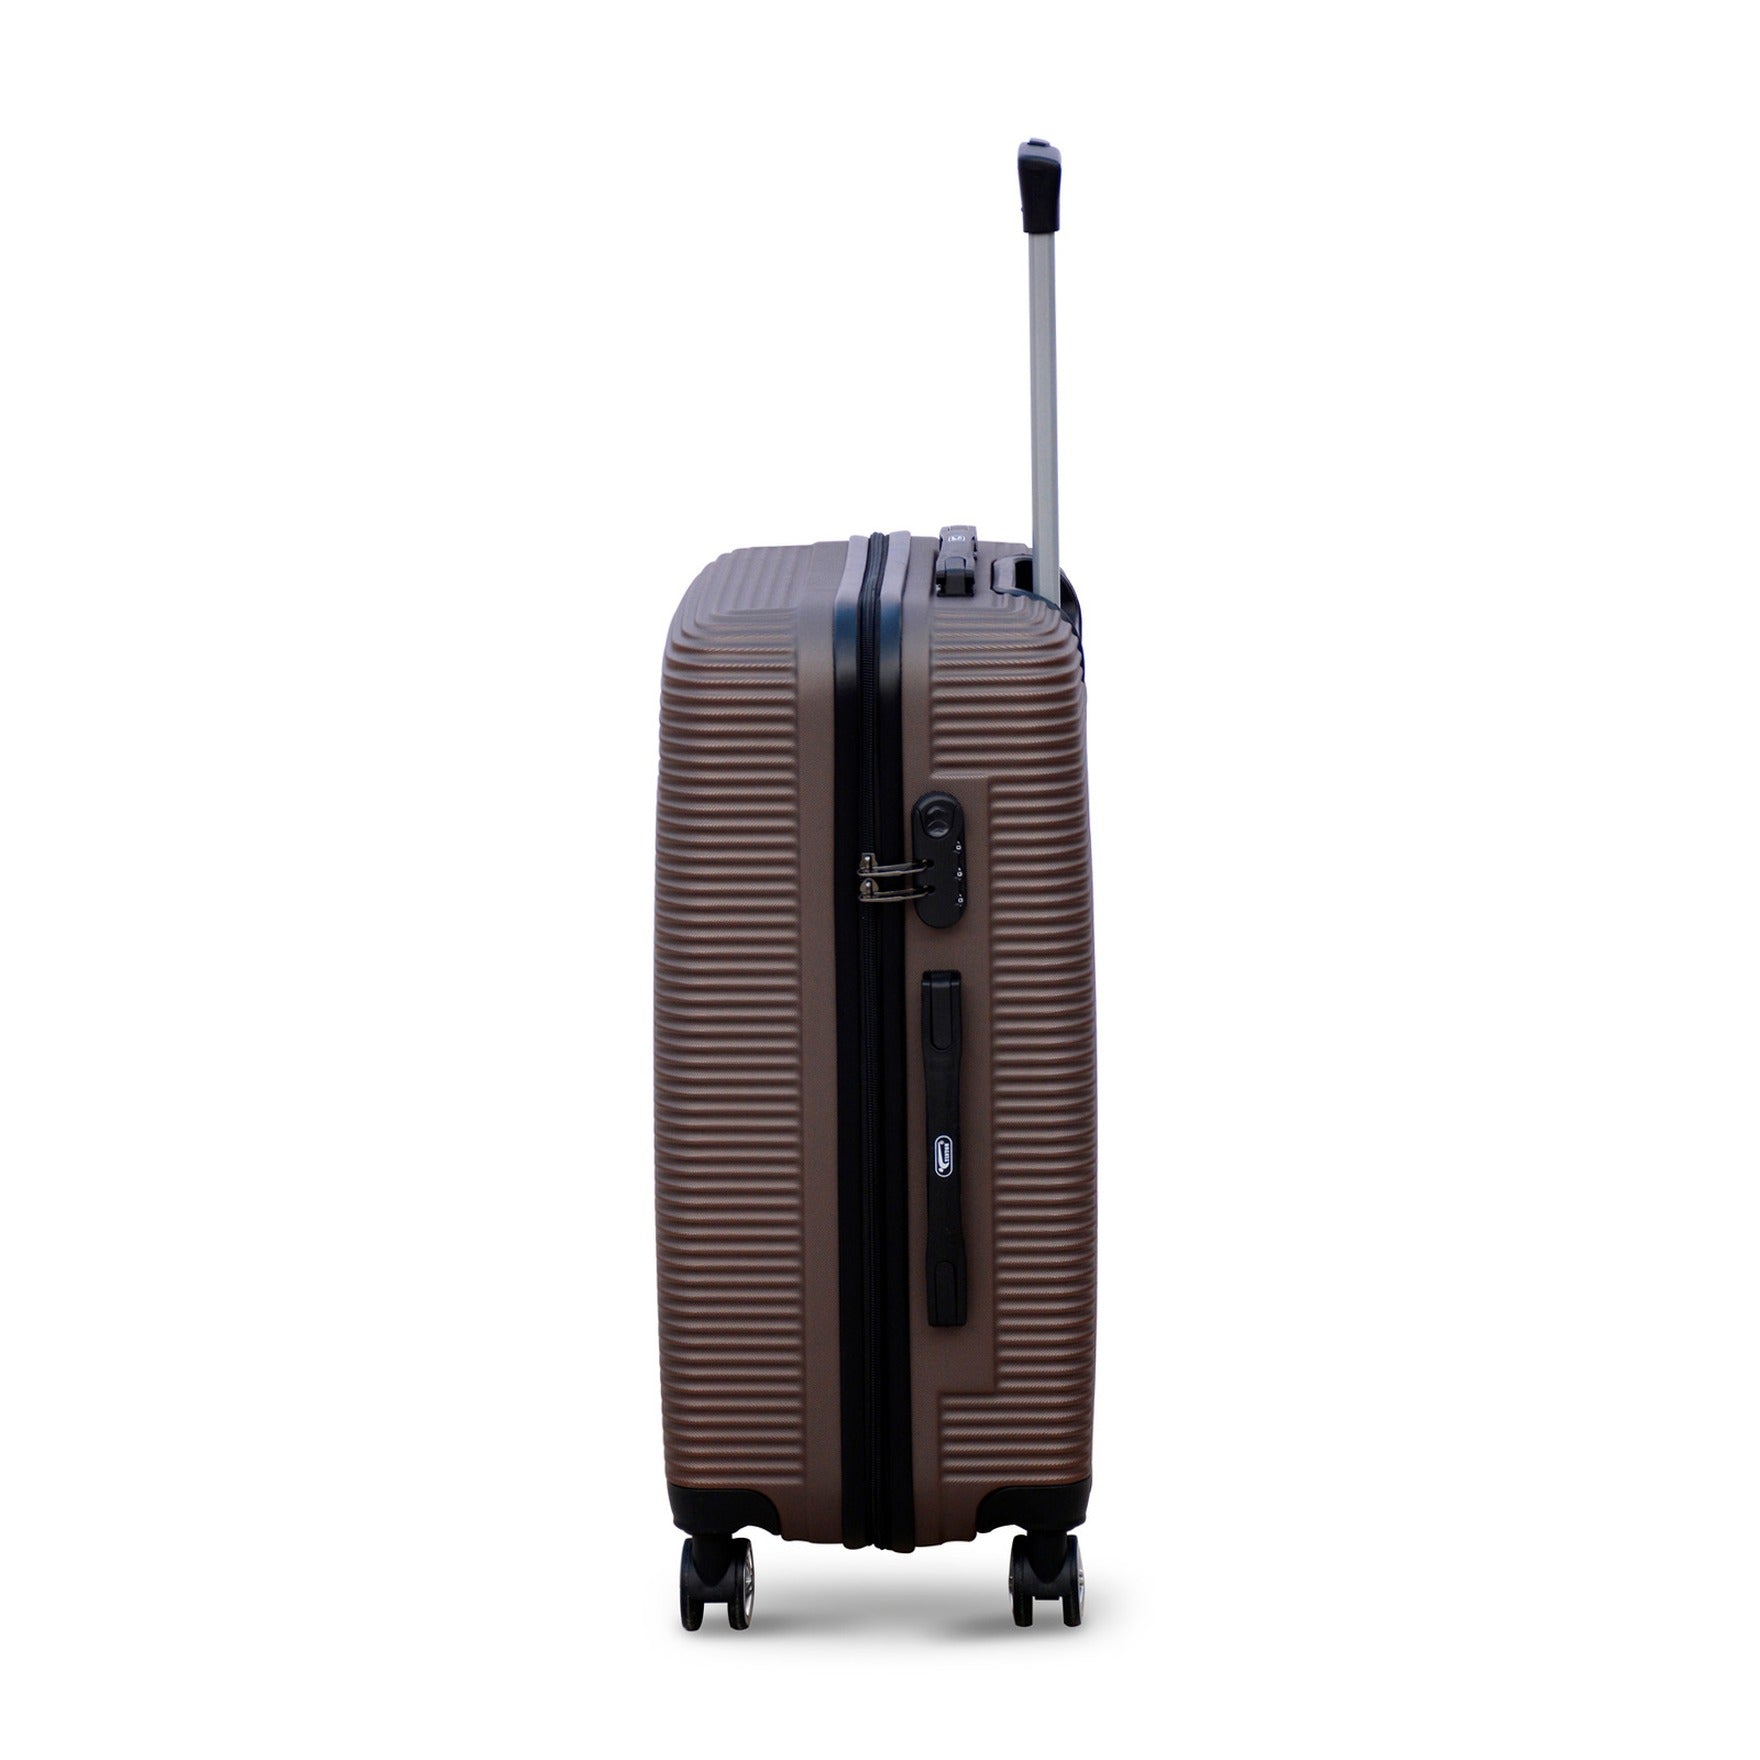 24" Coffee Colour JIAN ABS Line Luggage Lightweight Hard Case Trolley Bag With Spinner Wheel